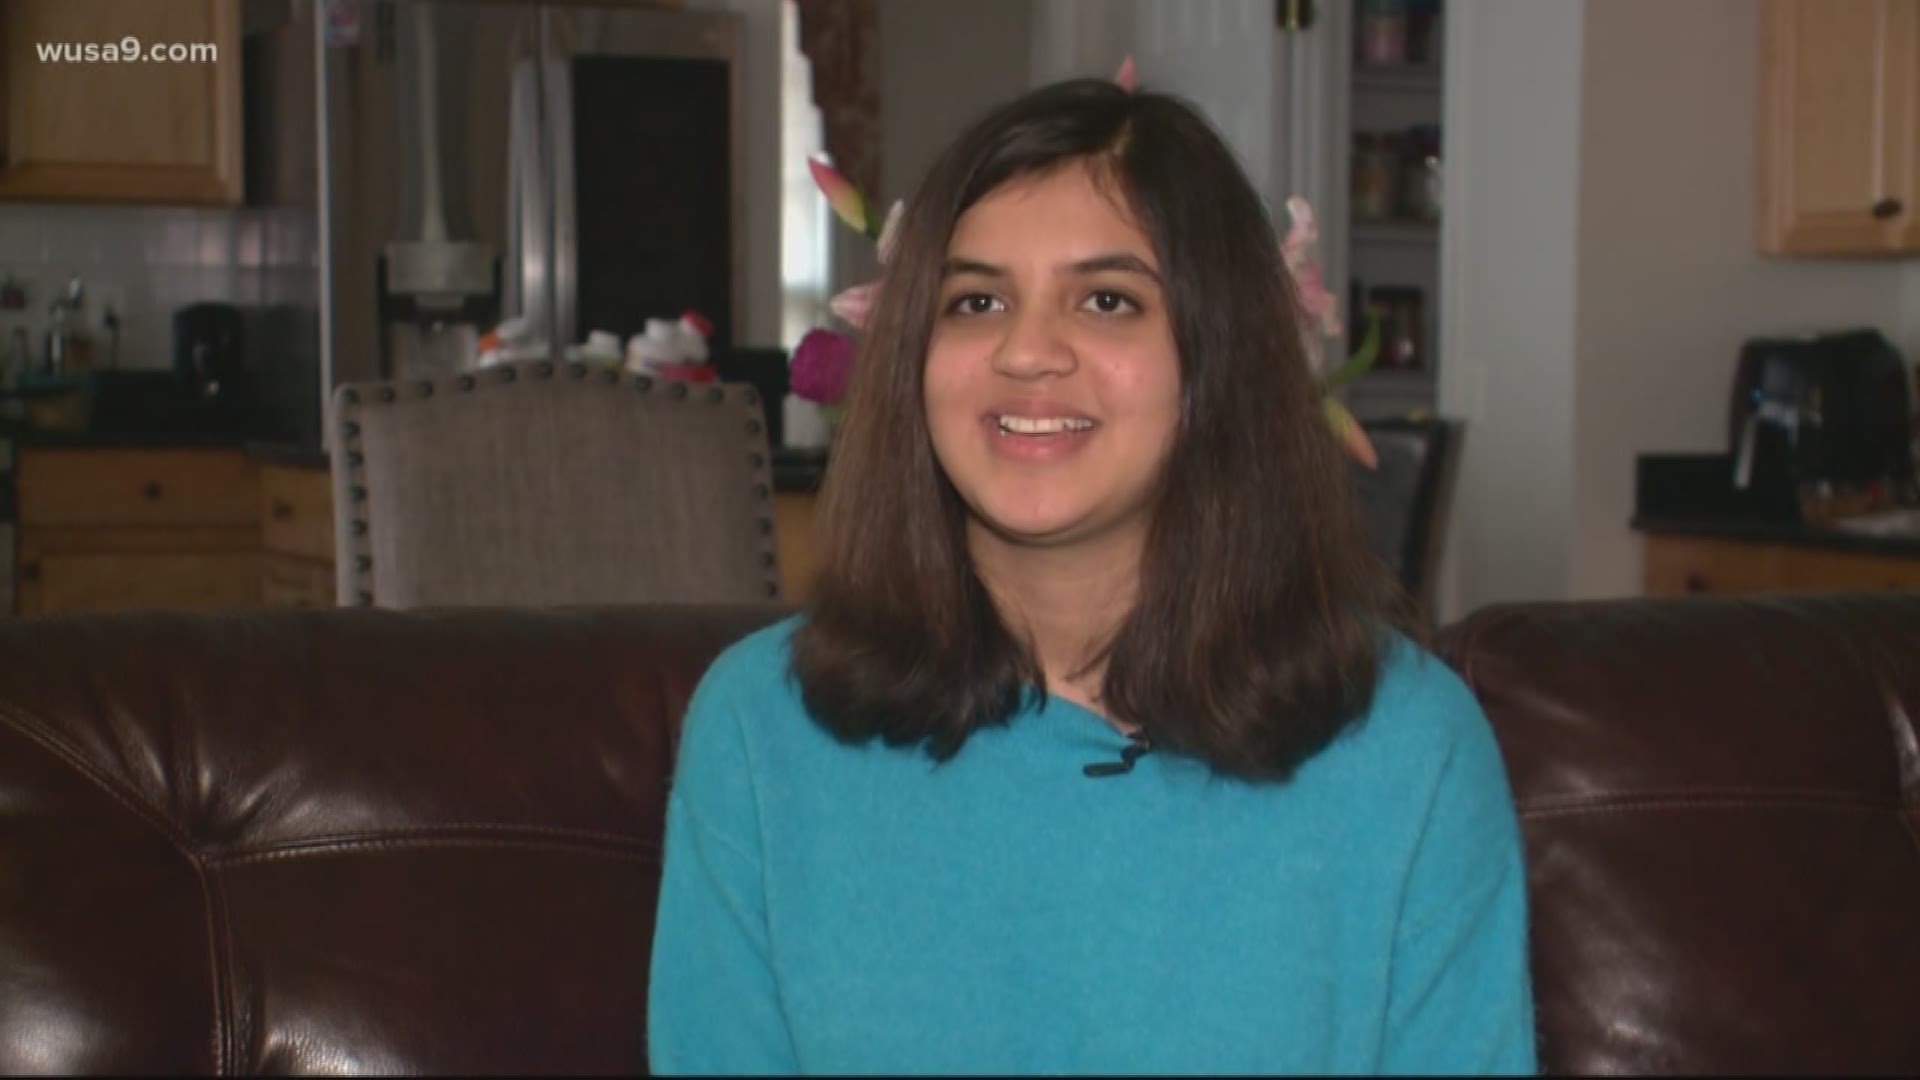 Anika Gulati, an eighth-grader from Herndon, just received the highest composite score on the standardized test.